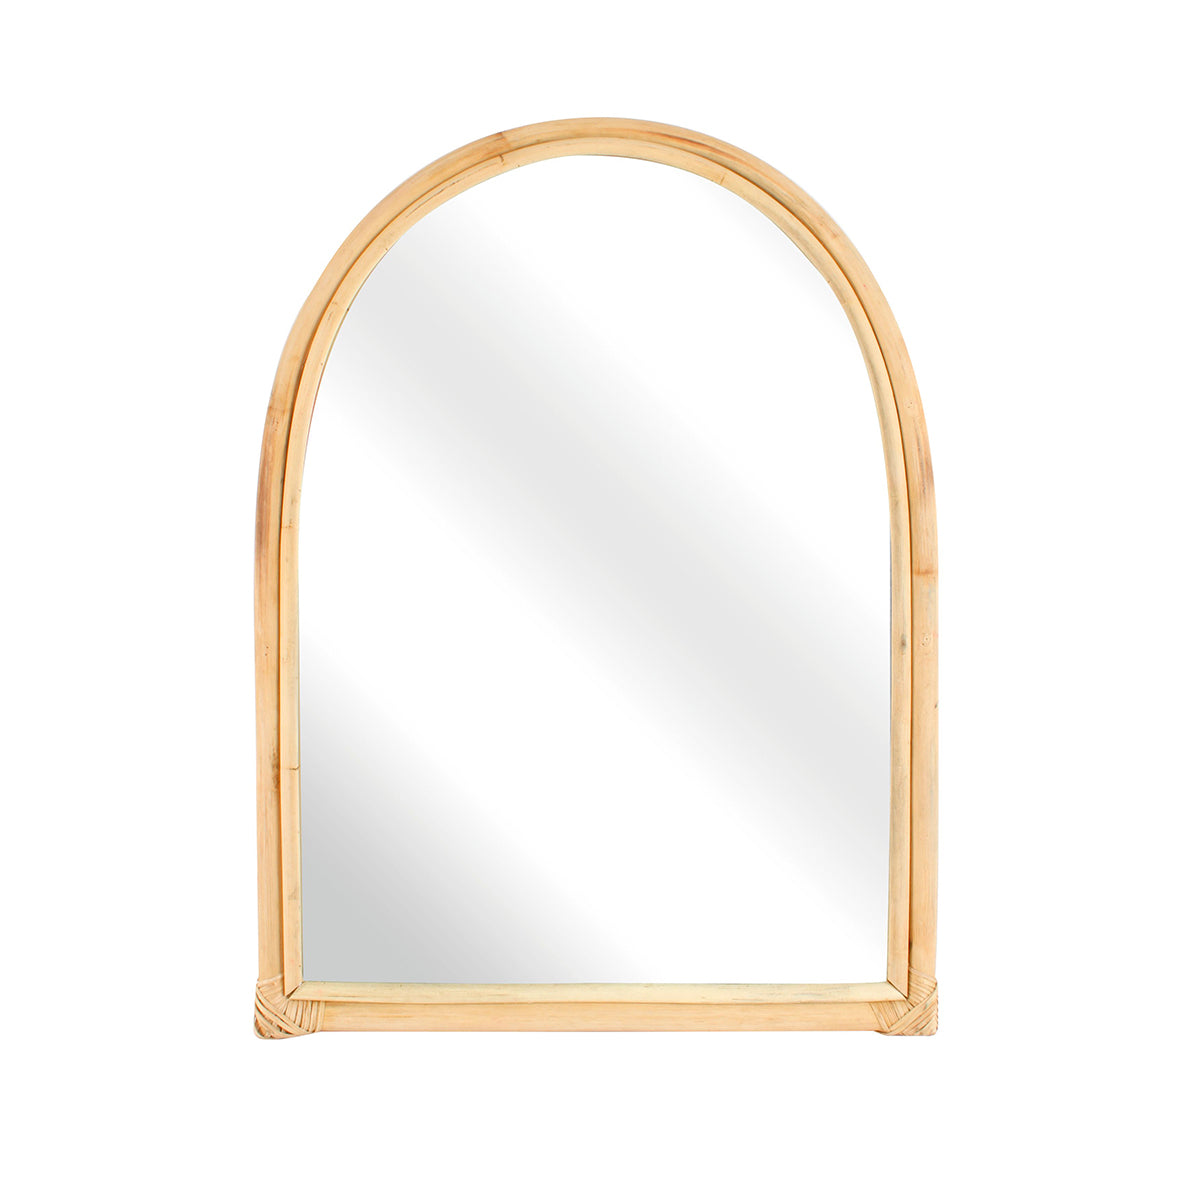 Ines Natural Rattan Arched Mirror 61 x 45cm